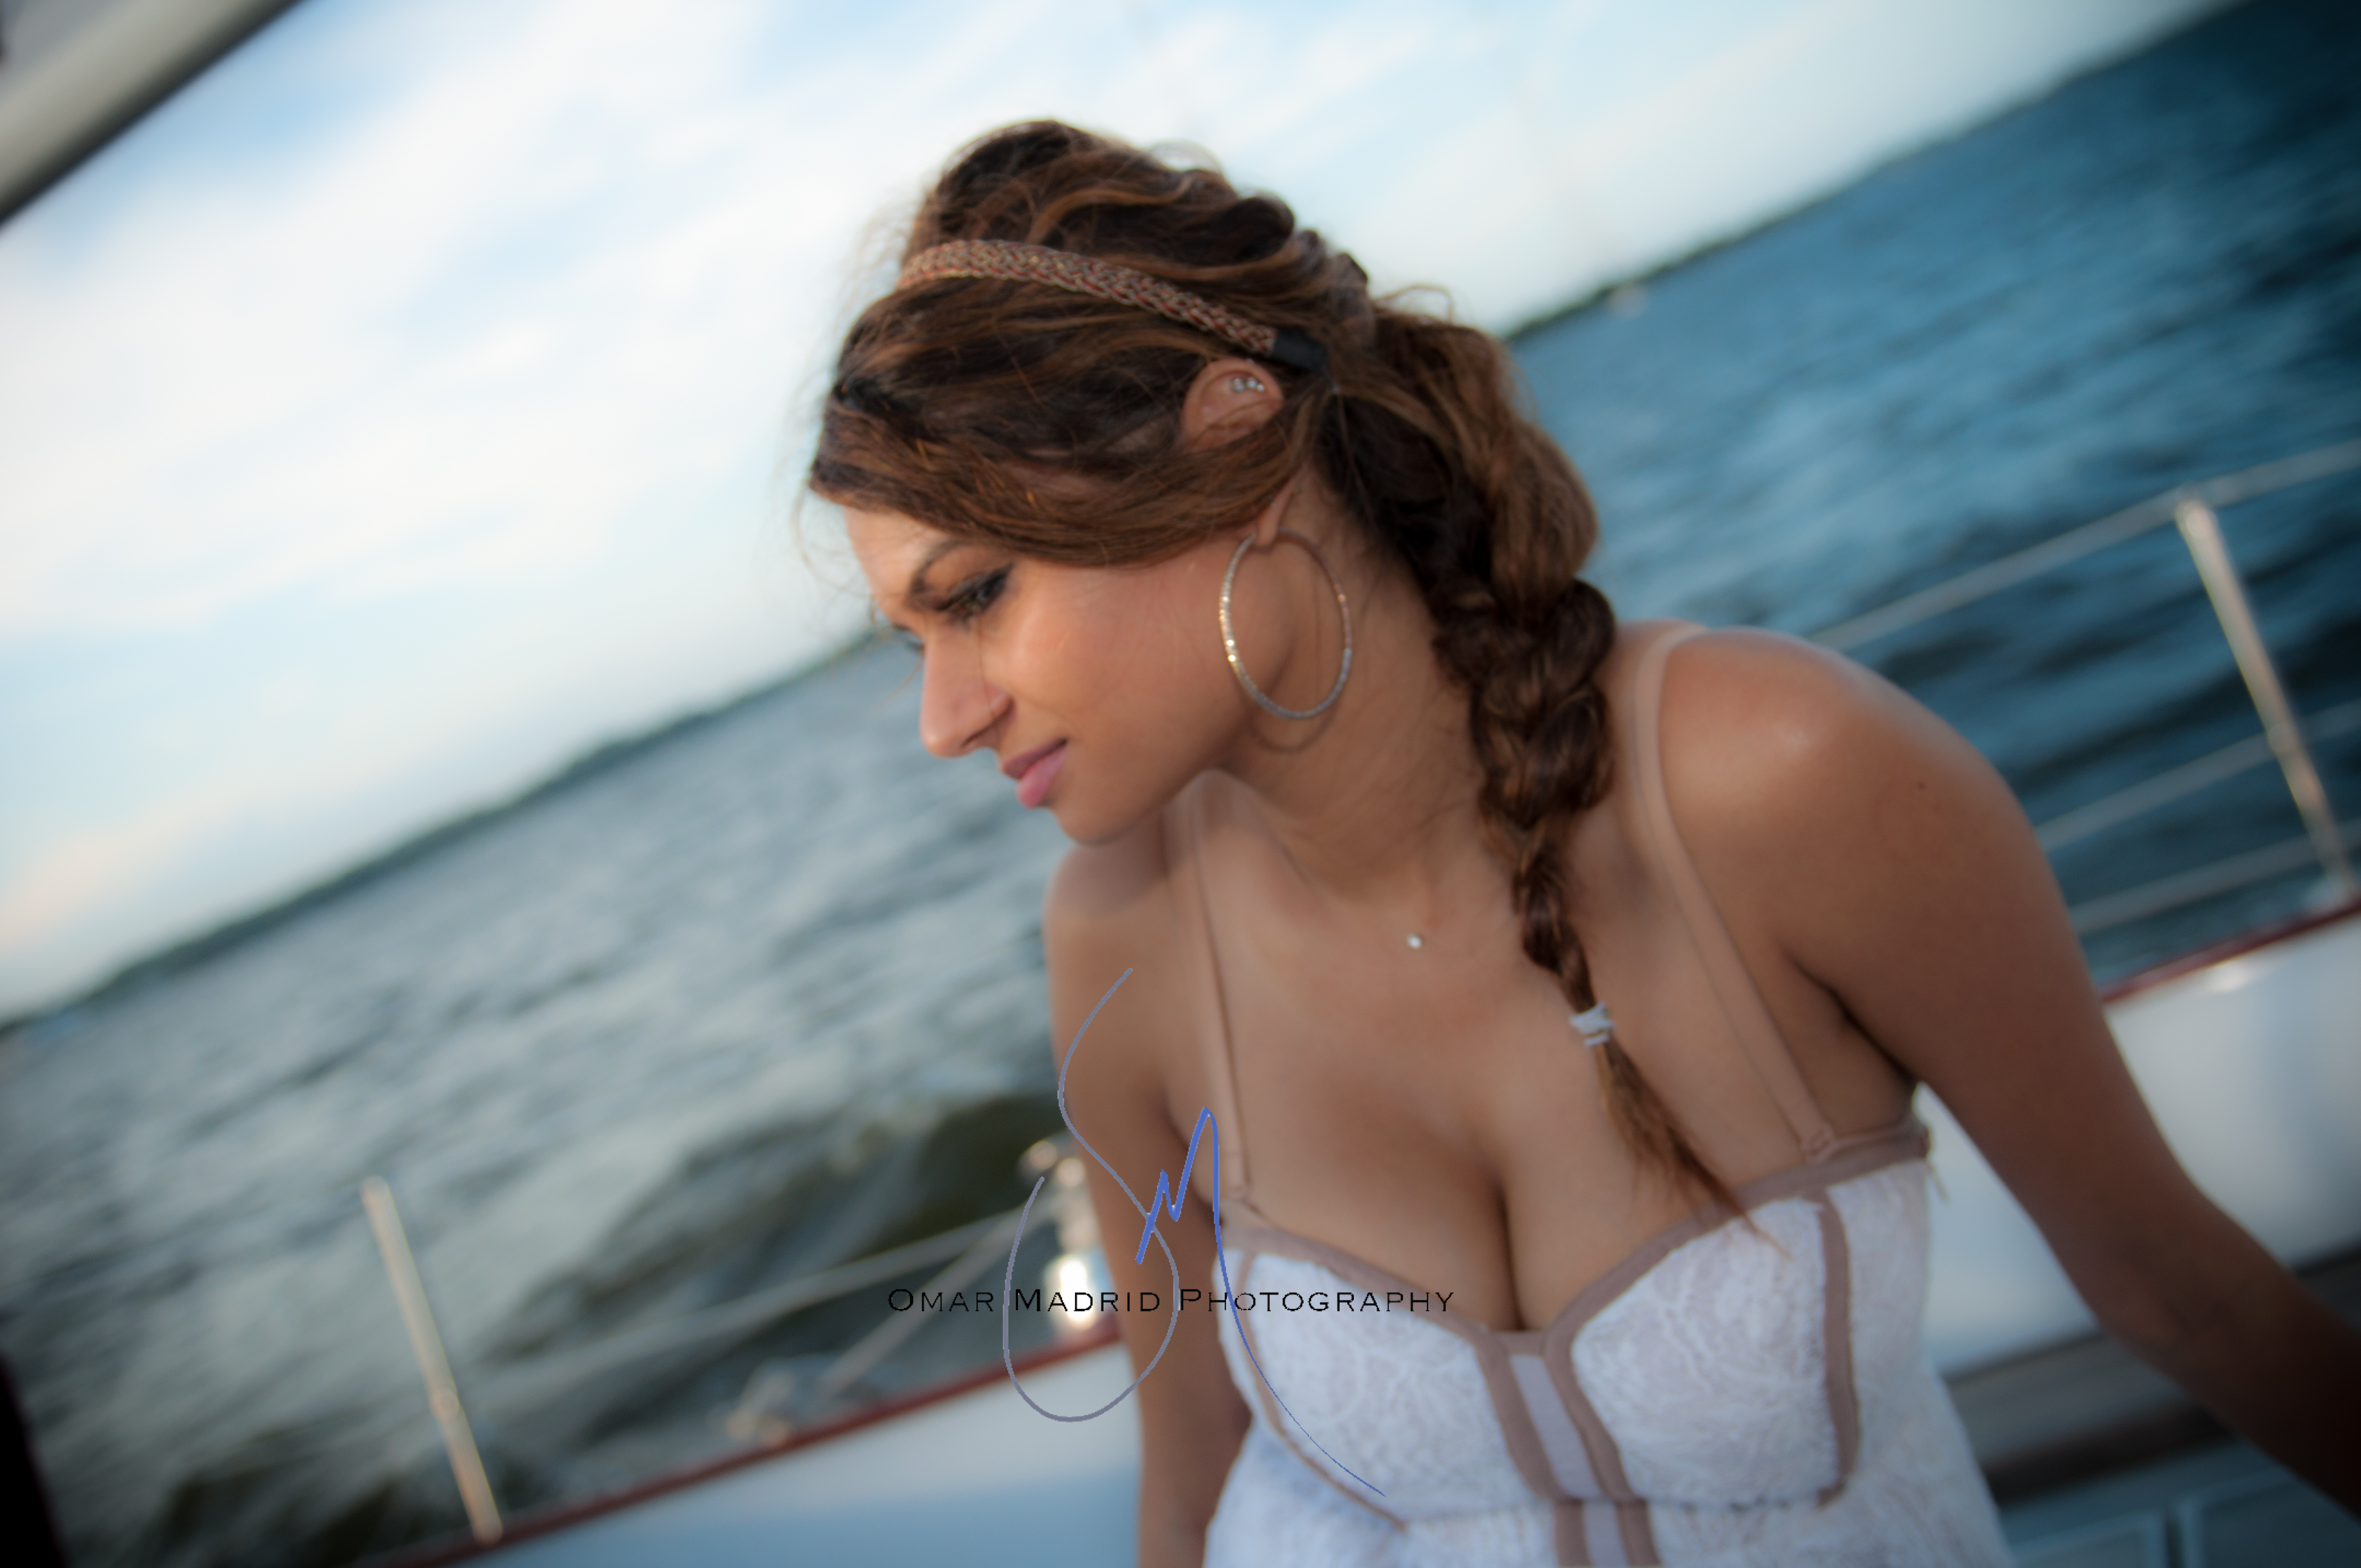 Beautiful young lady in a white dress sailing on the schooner